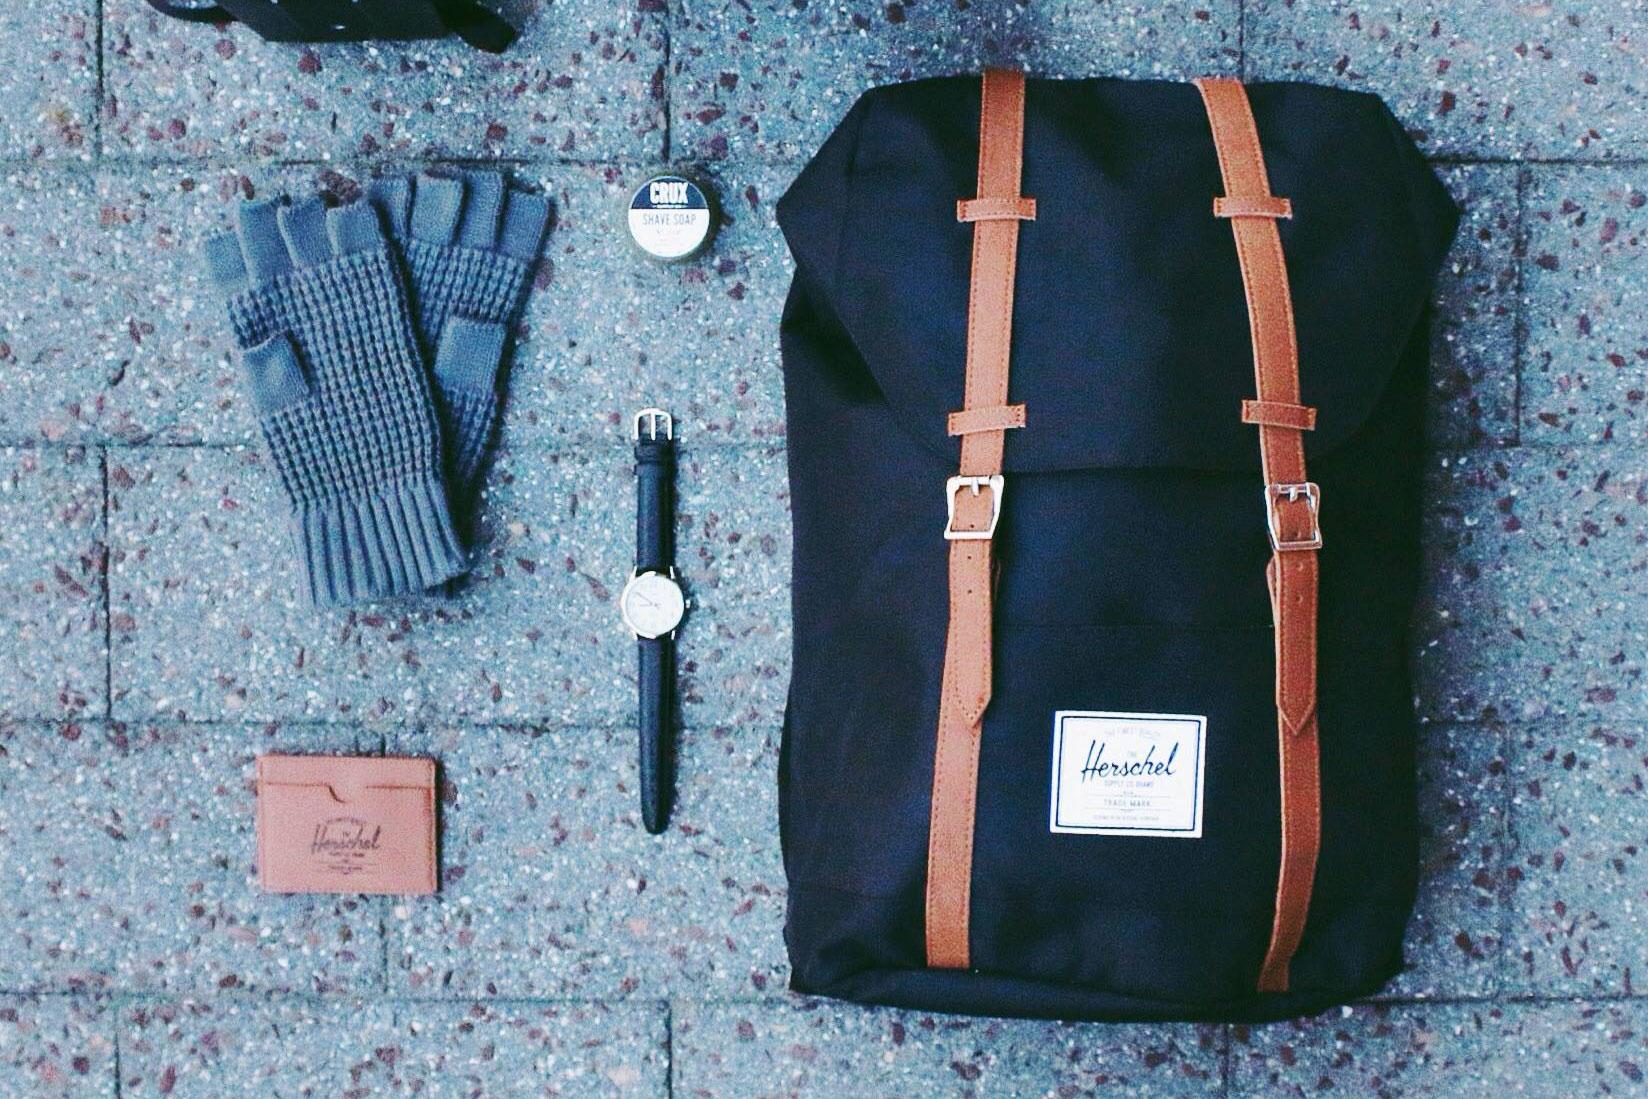 Herschel Supply Co. Retreat backpack displayed with a watch, floves, wallet, and other accessories.